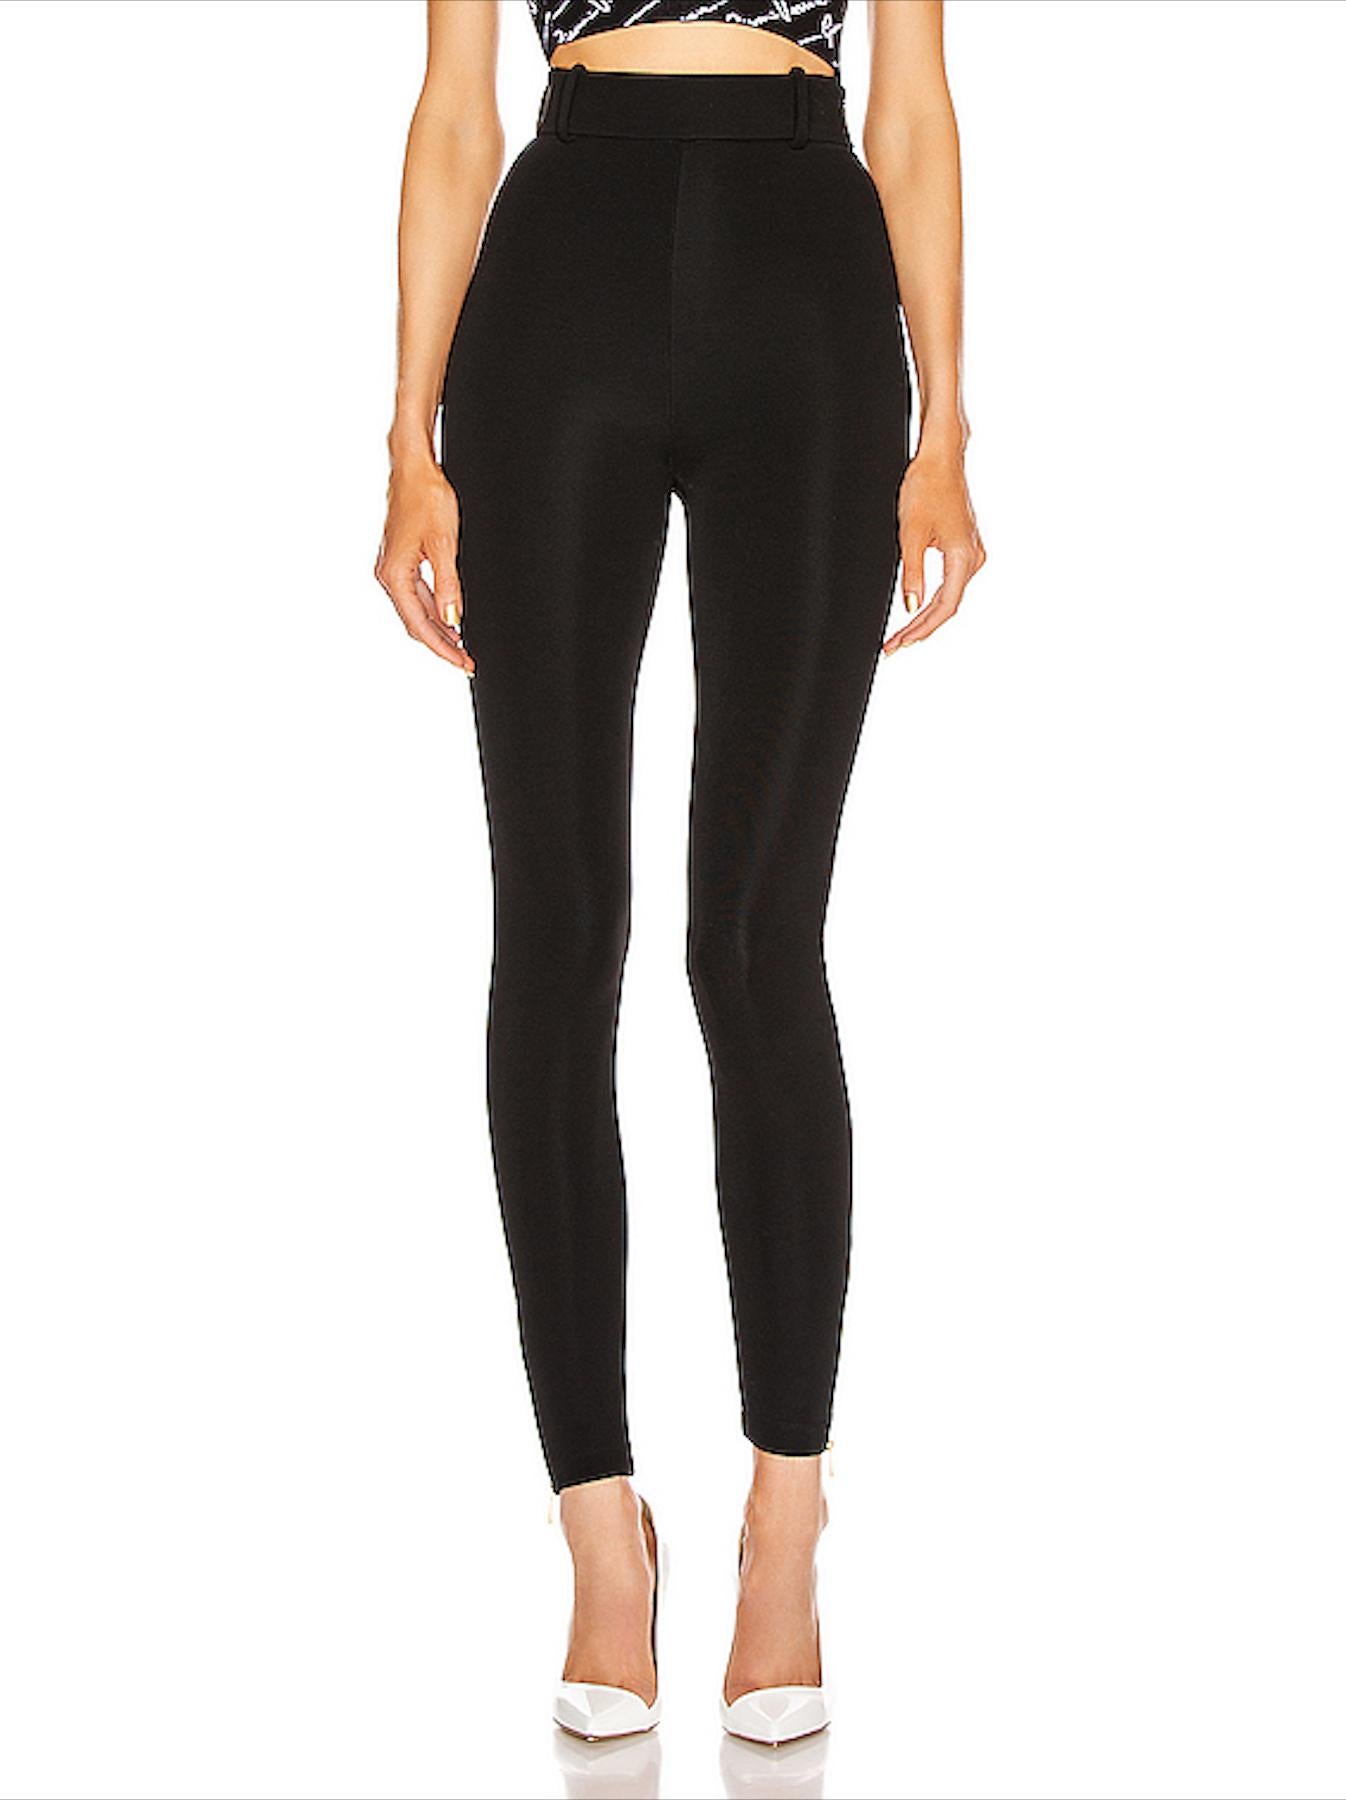 Versace Black Formal Knit Fitted Leggings / Pants

These classic and chic knit leggings are a closet must-have. They feature a high waisted skinny silhouette,  a hidden side zip closure, back zip pockets, belt loops, and gold tone zip closure at the